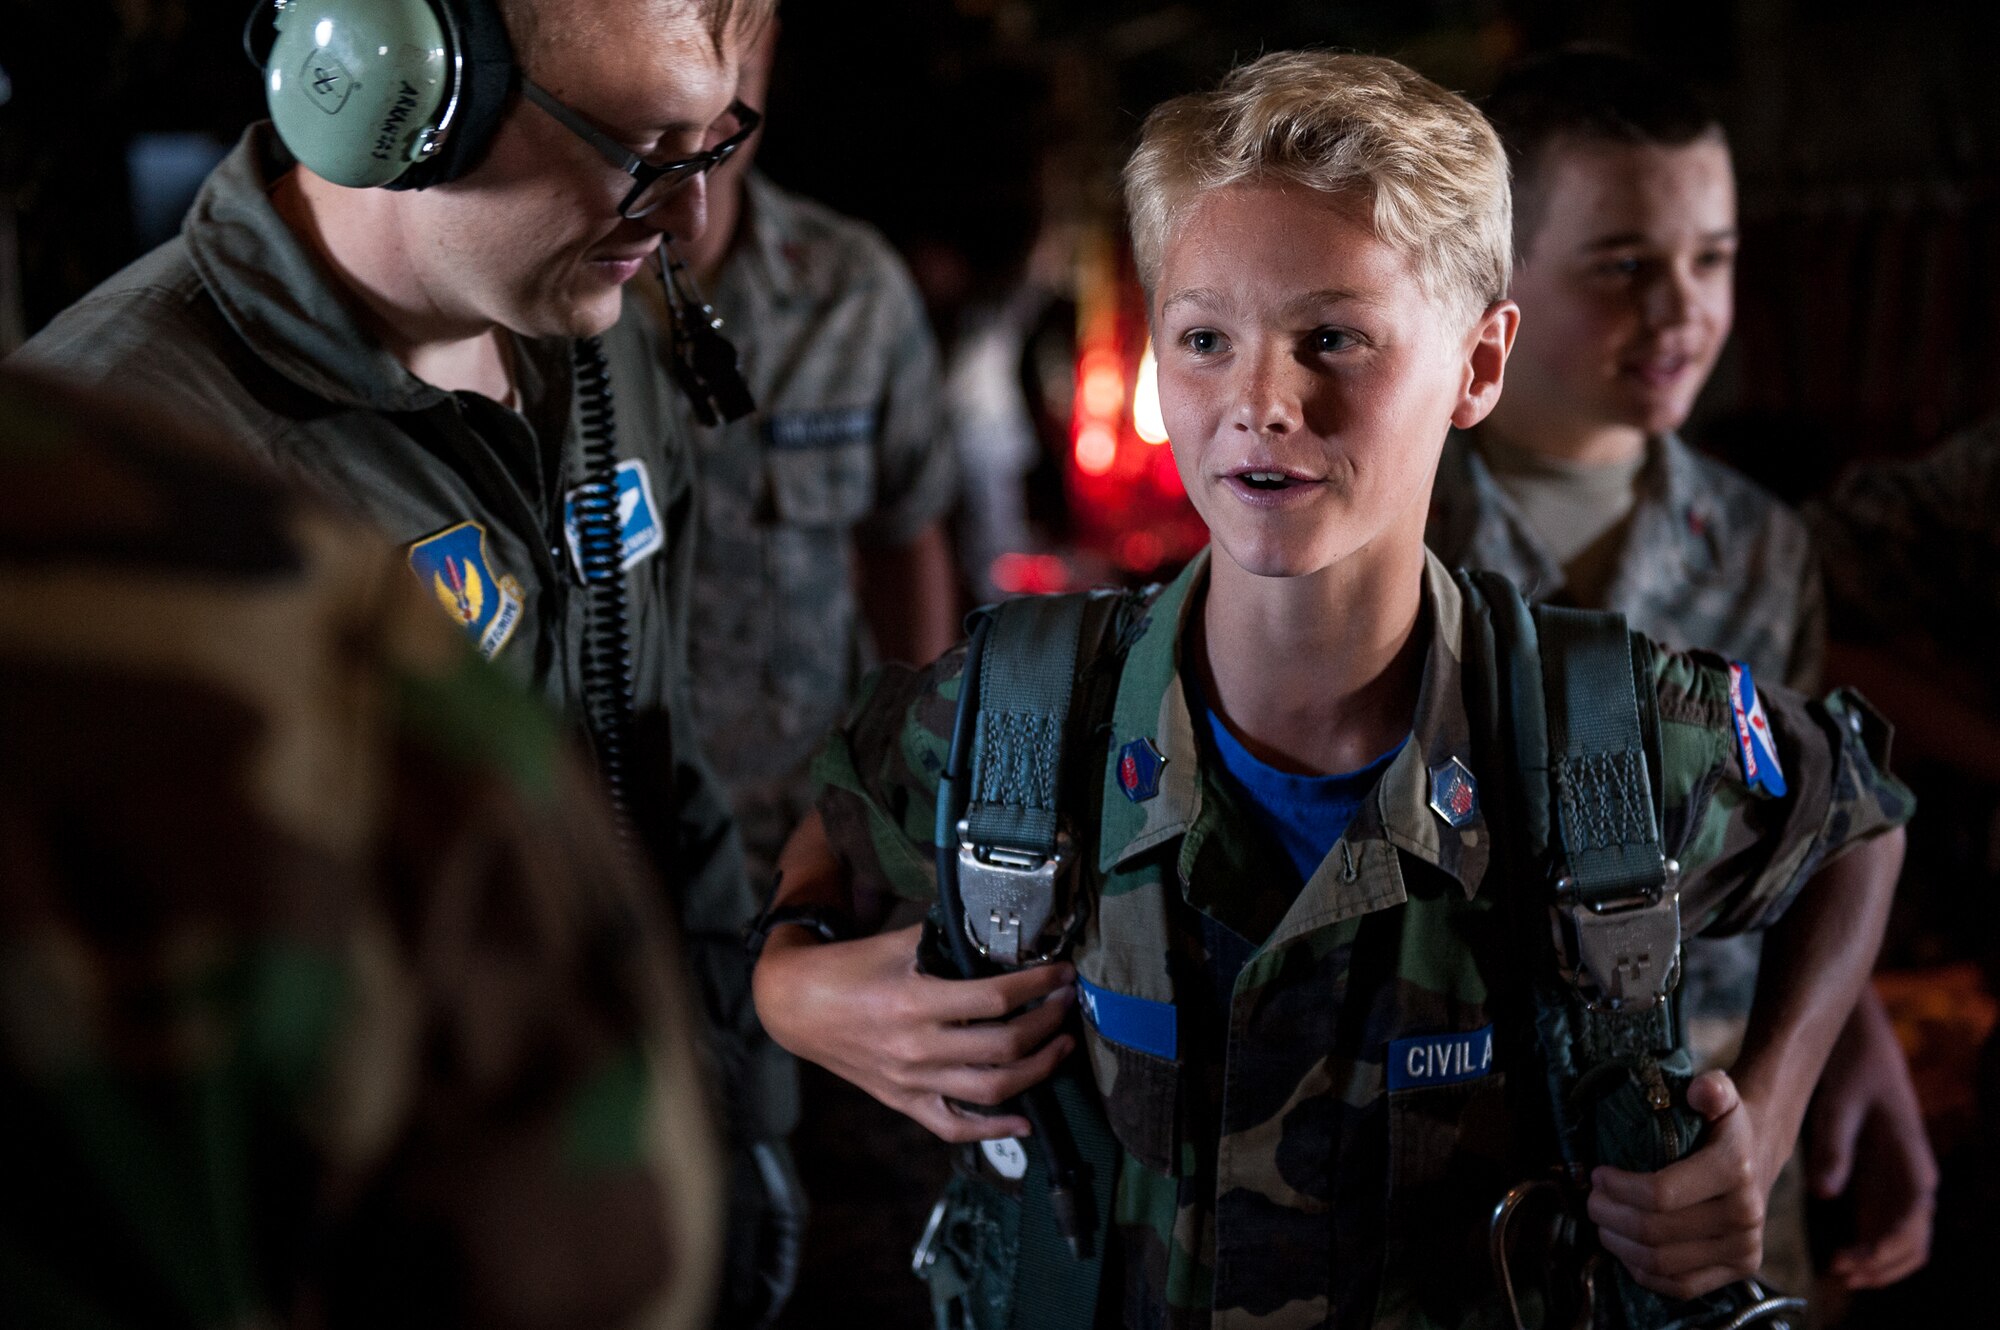 Civil Air Patrol Cadet Master Sgt. John Odom, Ramstein Cadet Squadron, tries on a parachute pack aboard a C-130J Super Hercules assigned to the 37th Airlift Squadron on Ramstein Air Base, during a flight over Rheinland-Pfalz, Germany, June 20, 2017. The flight gave cadets the chance to learn about operations on the aircraft which could potentially be a career path they may take one day. (U.S. Air Force photo by Senior Airman Devin Boyer)